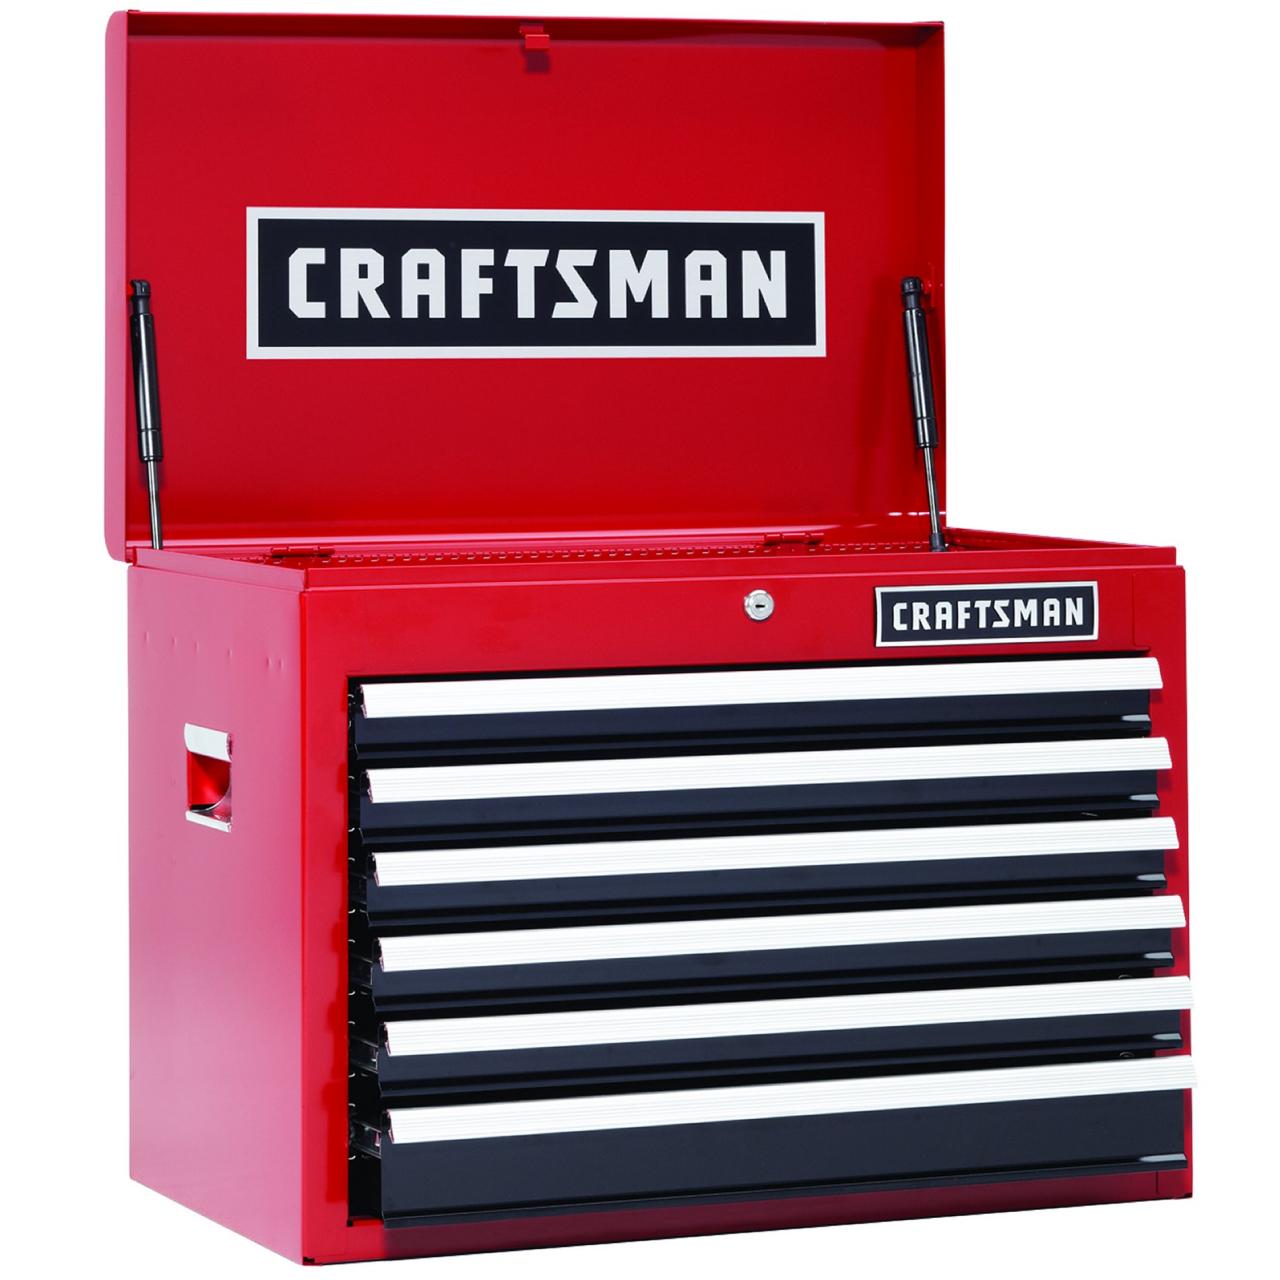 Craftsman 26 in. 6-Drawer Heavy-Duty Ball Bearing Top Chest - Red/Black